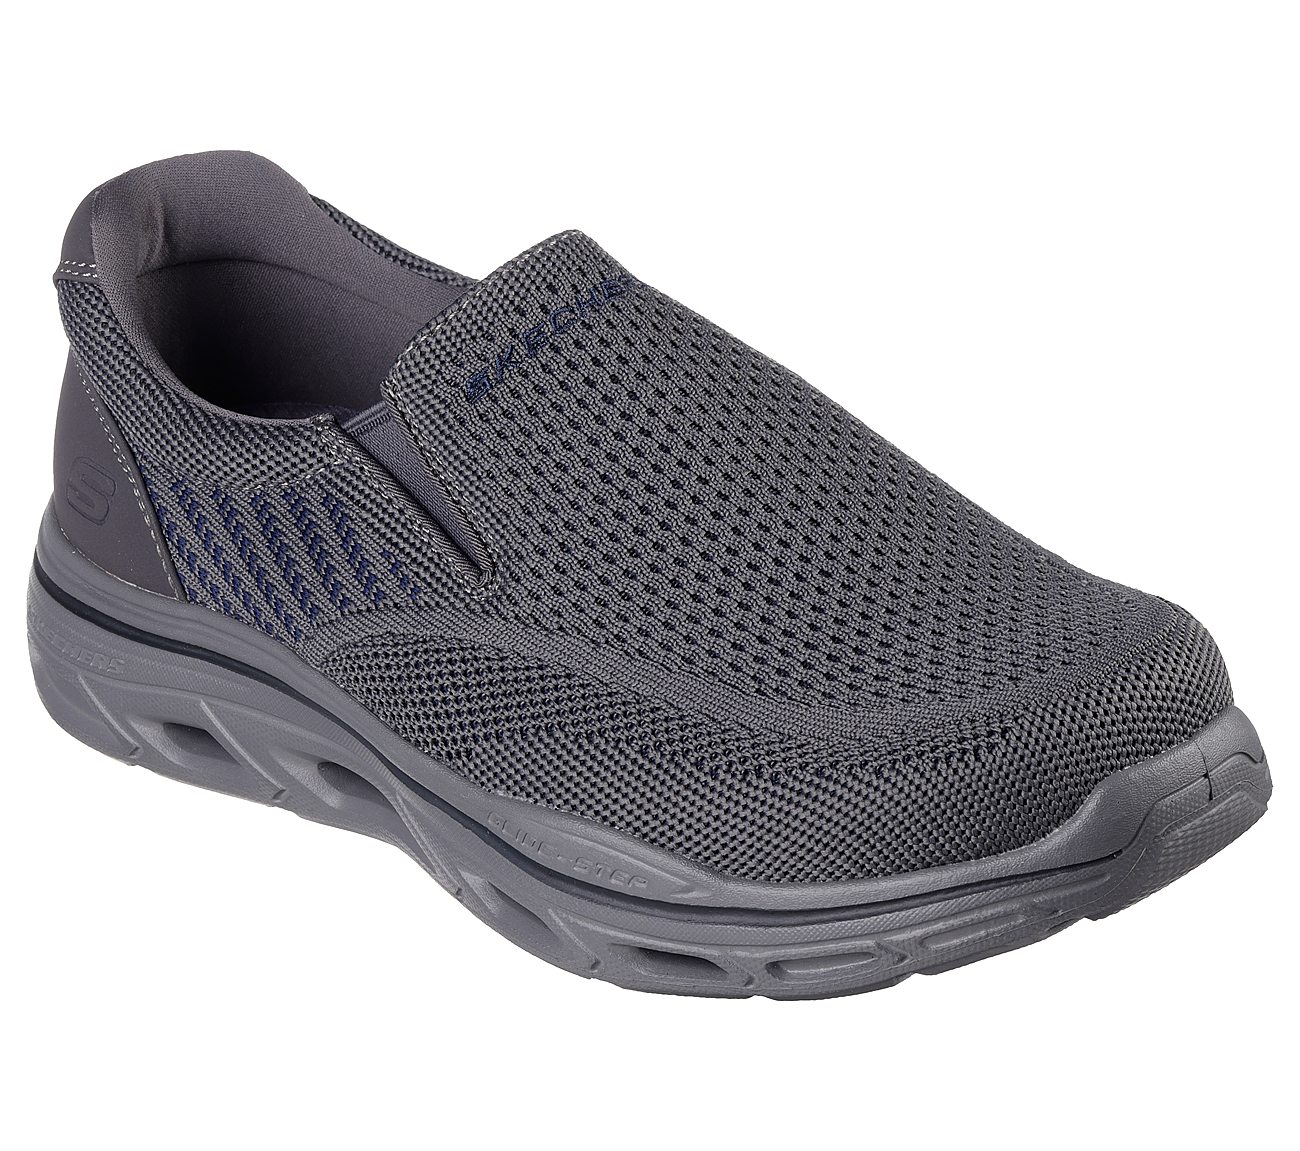 GLIDE-STEP EXPECTED - VIRDEN, GREY/NAVY Footwear Right View